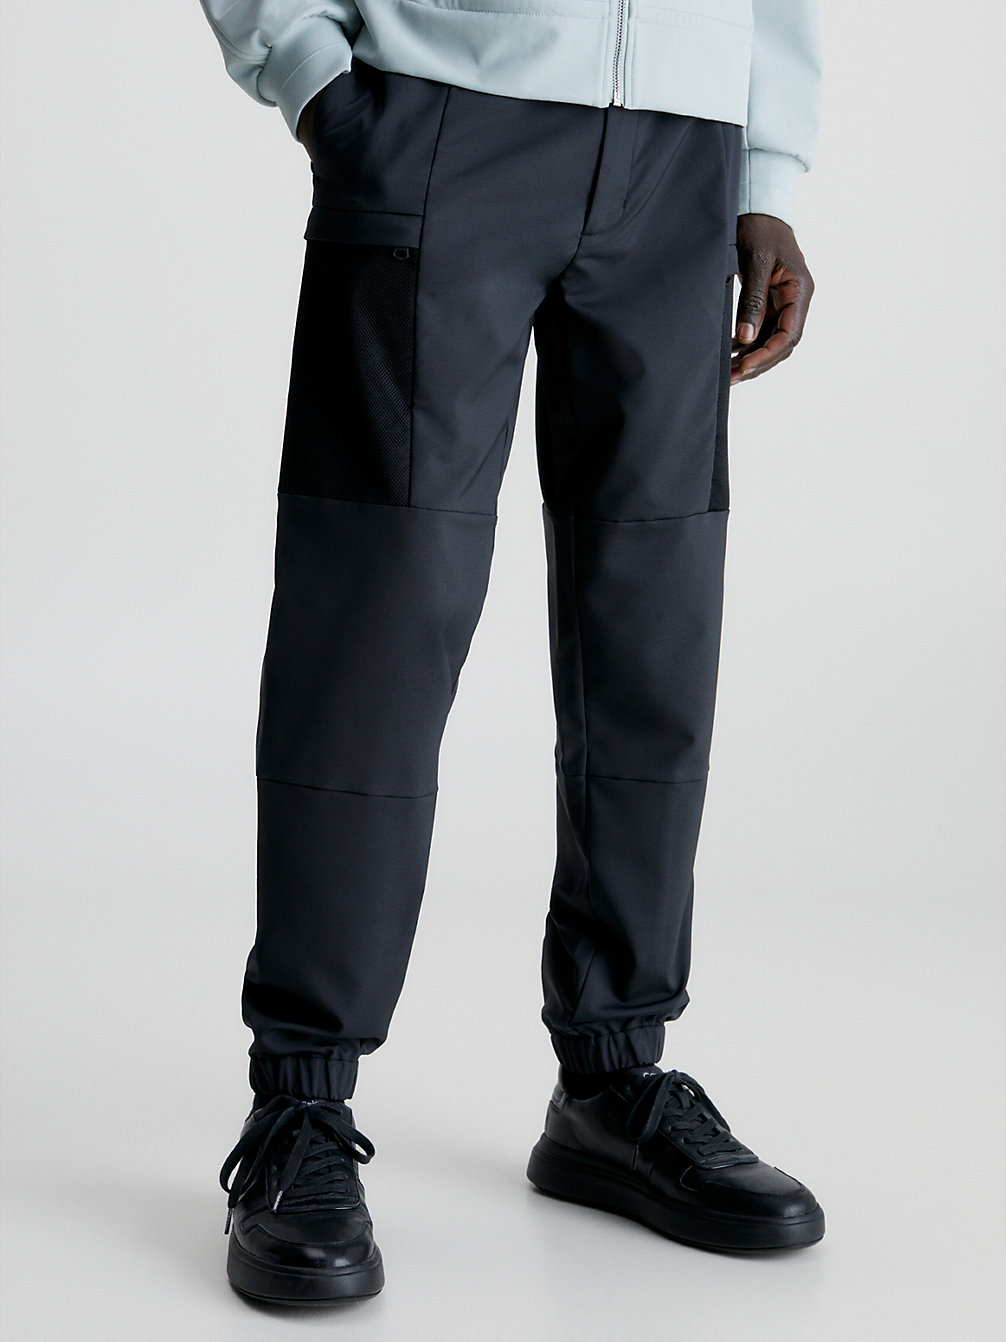 CK BLACK > Recycled Polyester Cargo Trousers > undefined женщины - Calvin Klein